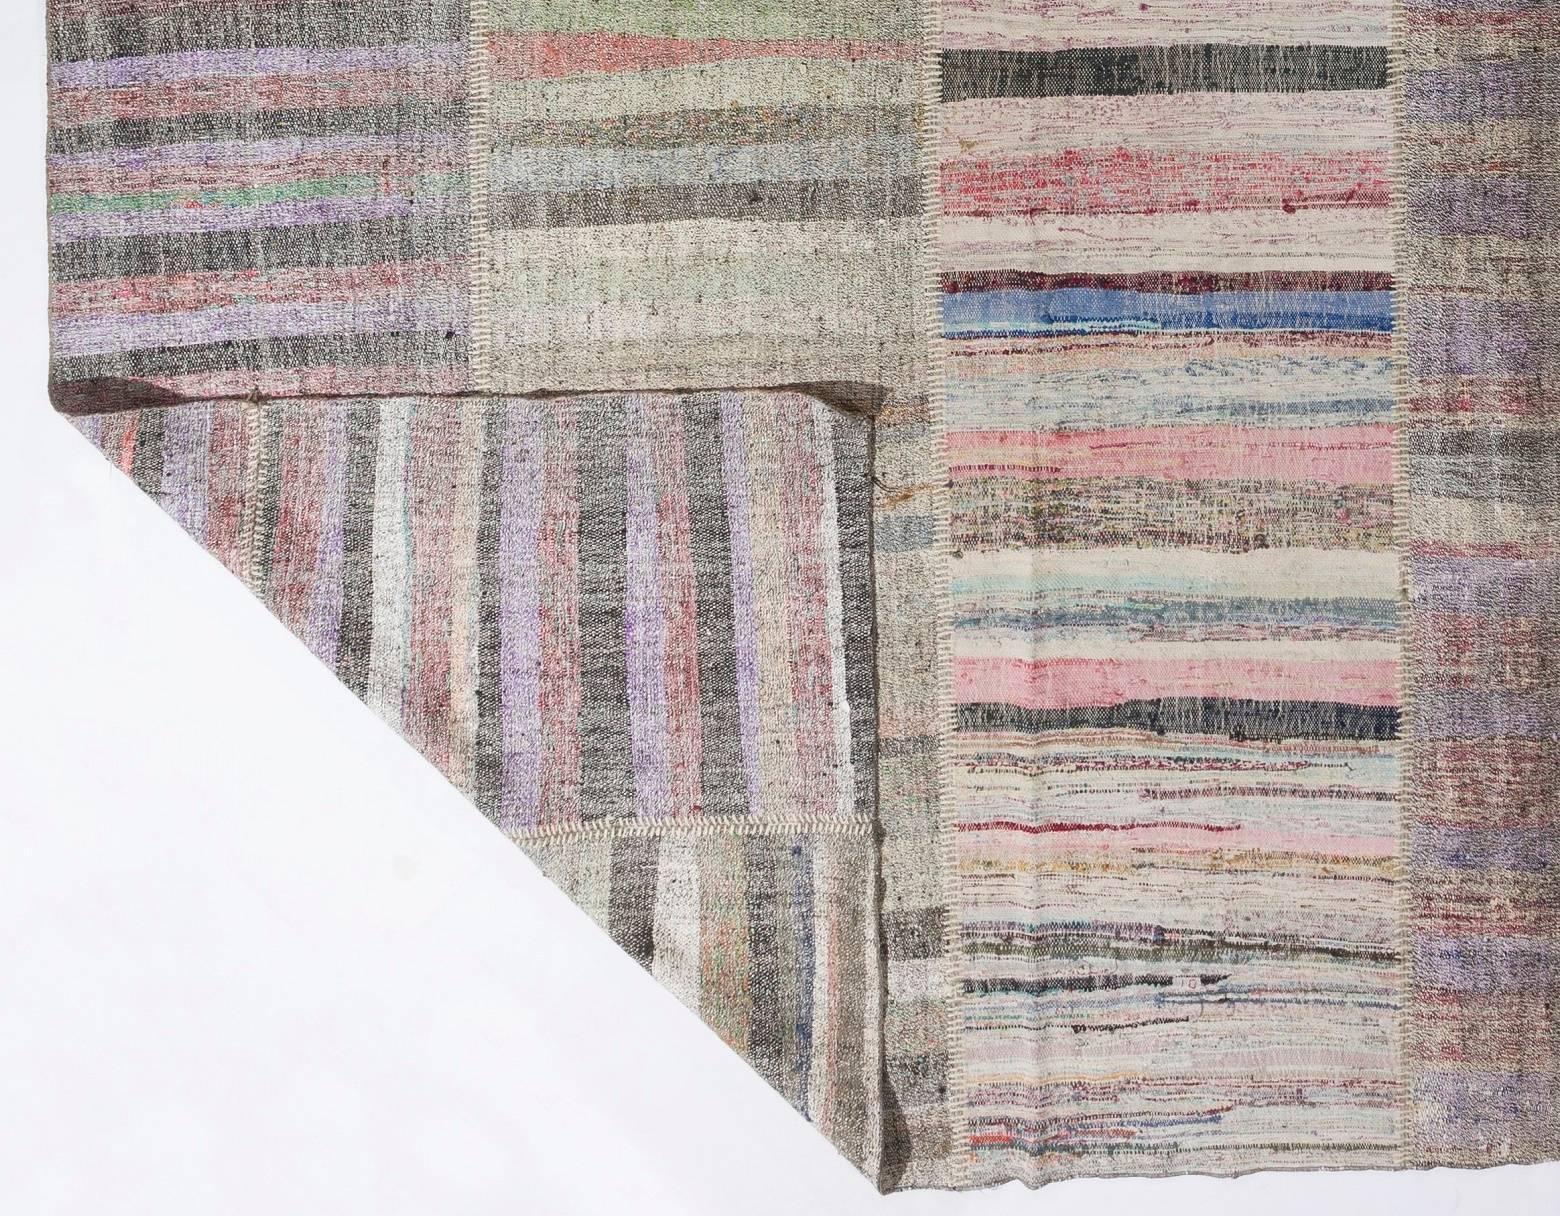 These authentic flat-weaves (Kilims) from Eastern Turkey were handwoven by Nomads to be used as floor coverings in their tents and winter homes. They were made to use for everyday life rather than re-sale and export purposes and today they are very